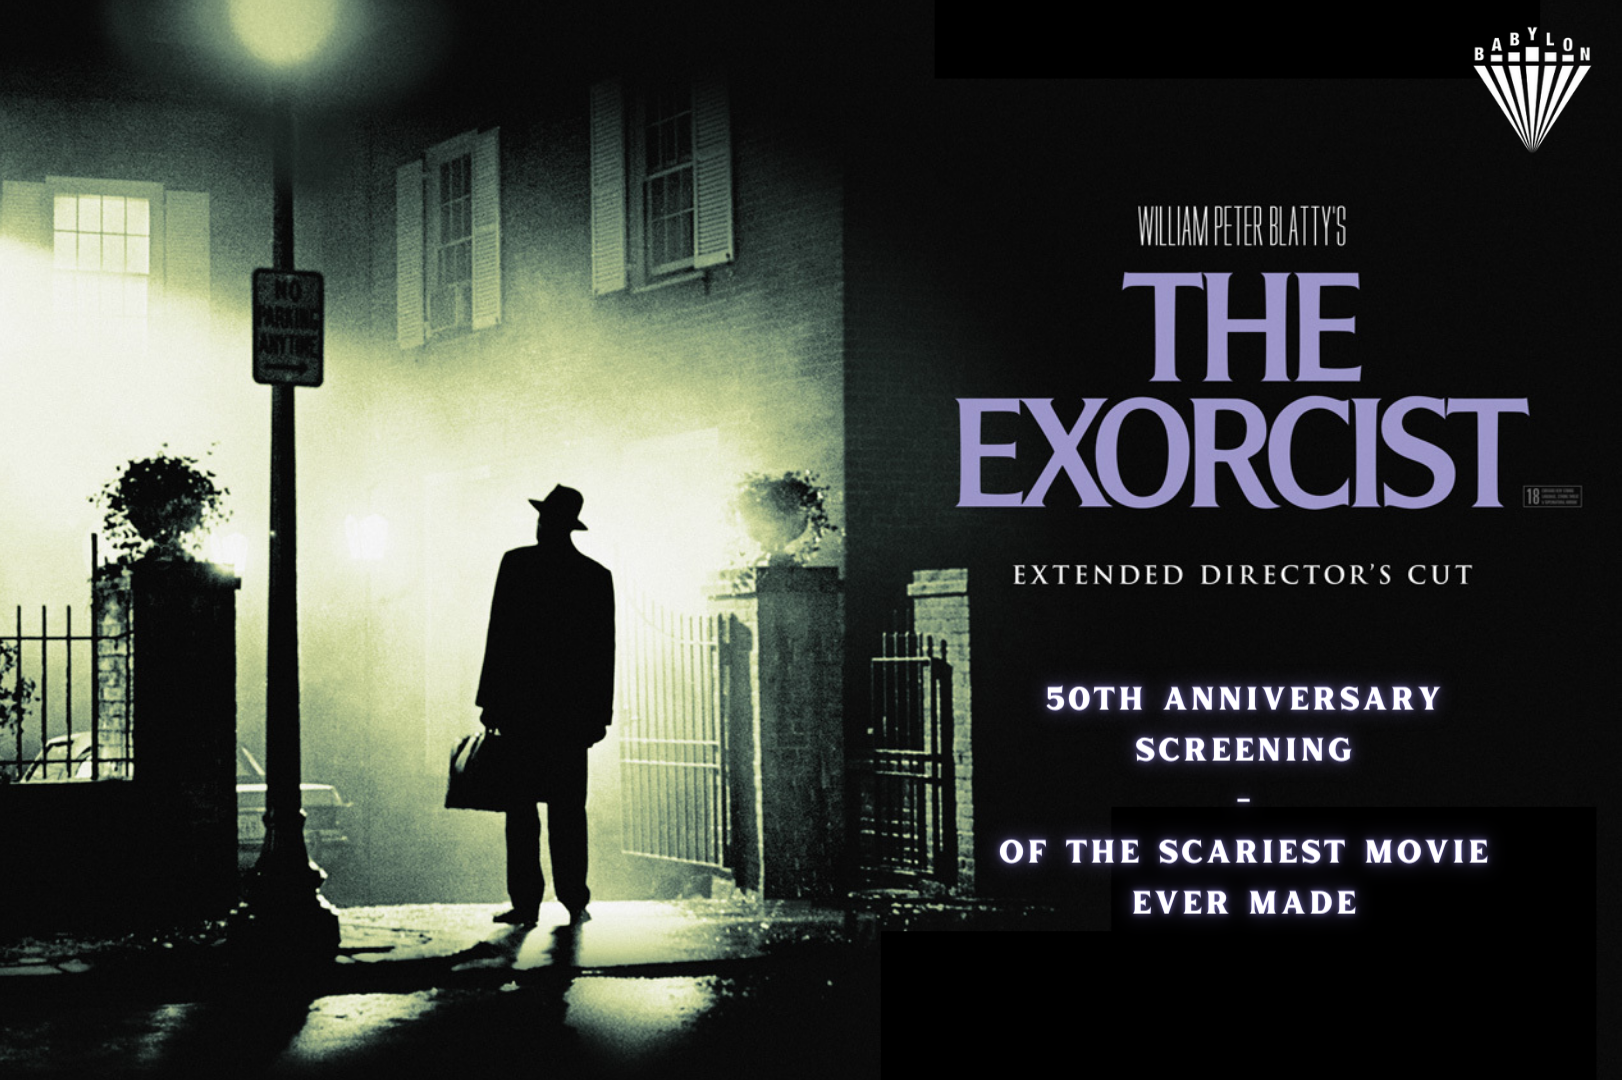 BABYLON in Berlin THE EXORCIST Extended Director’s Cut! 50th